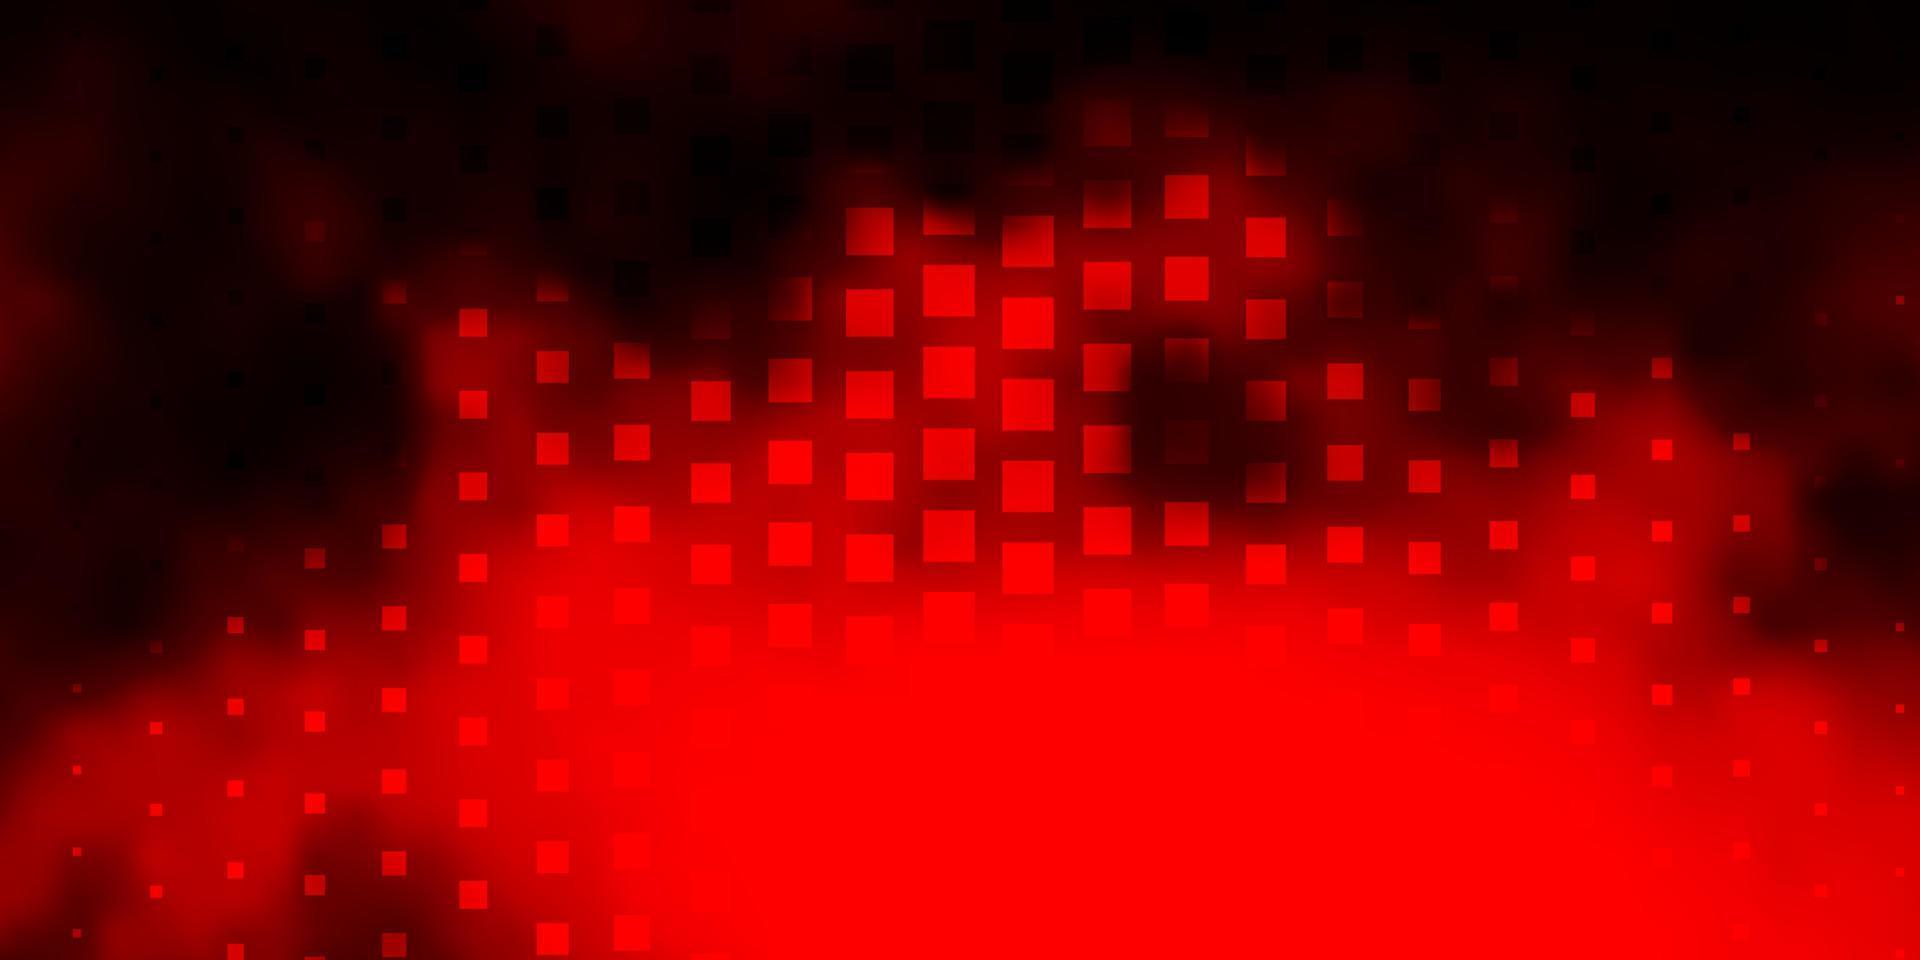 Dark Red vector background in polygonal style.